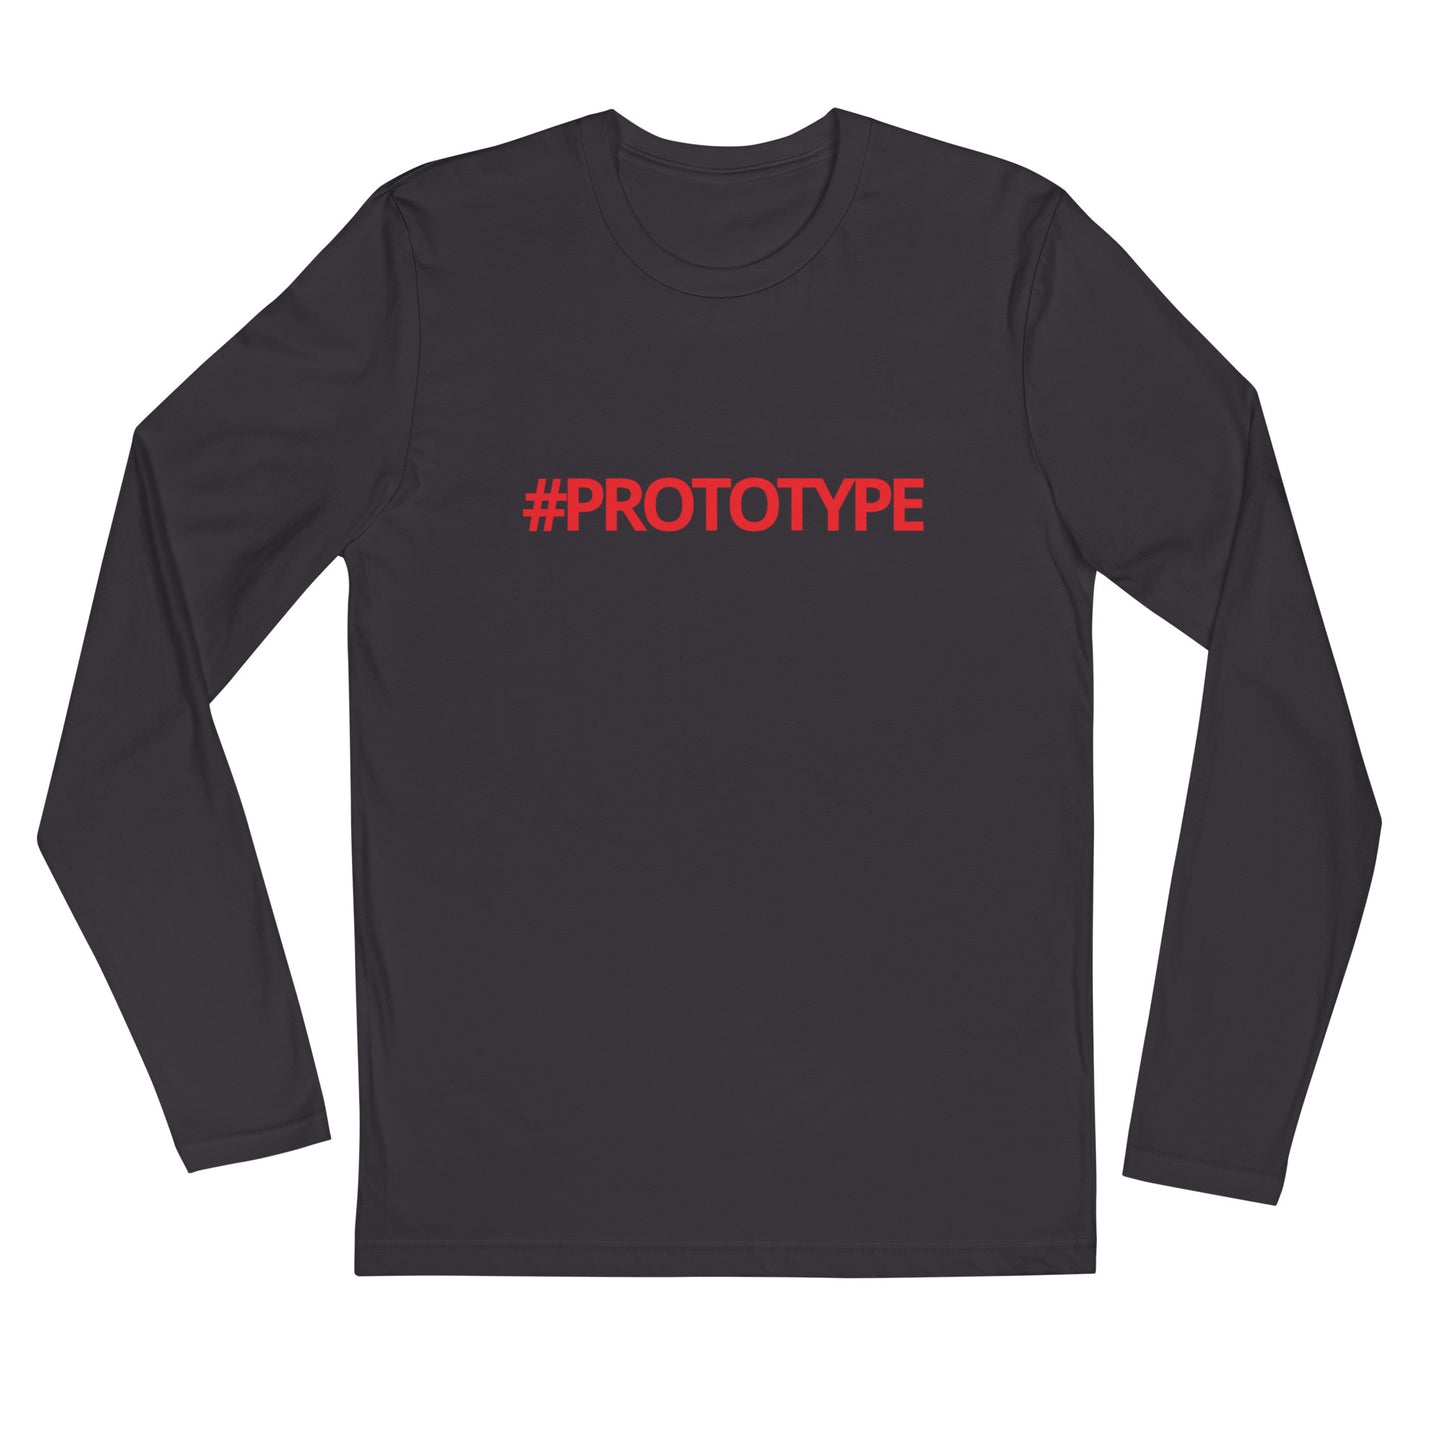 Prototype Long Sleeve Fitted Crew